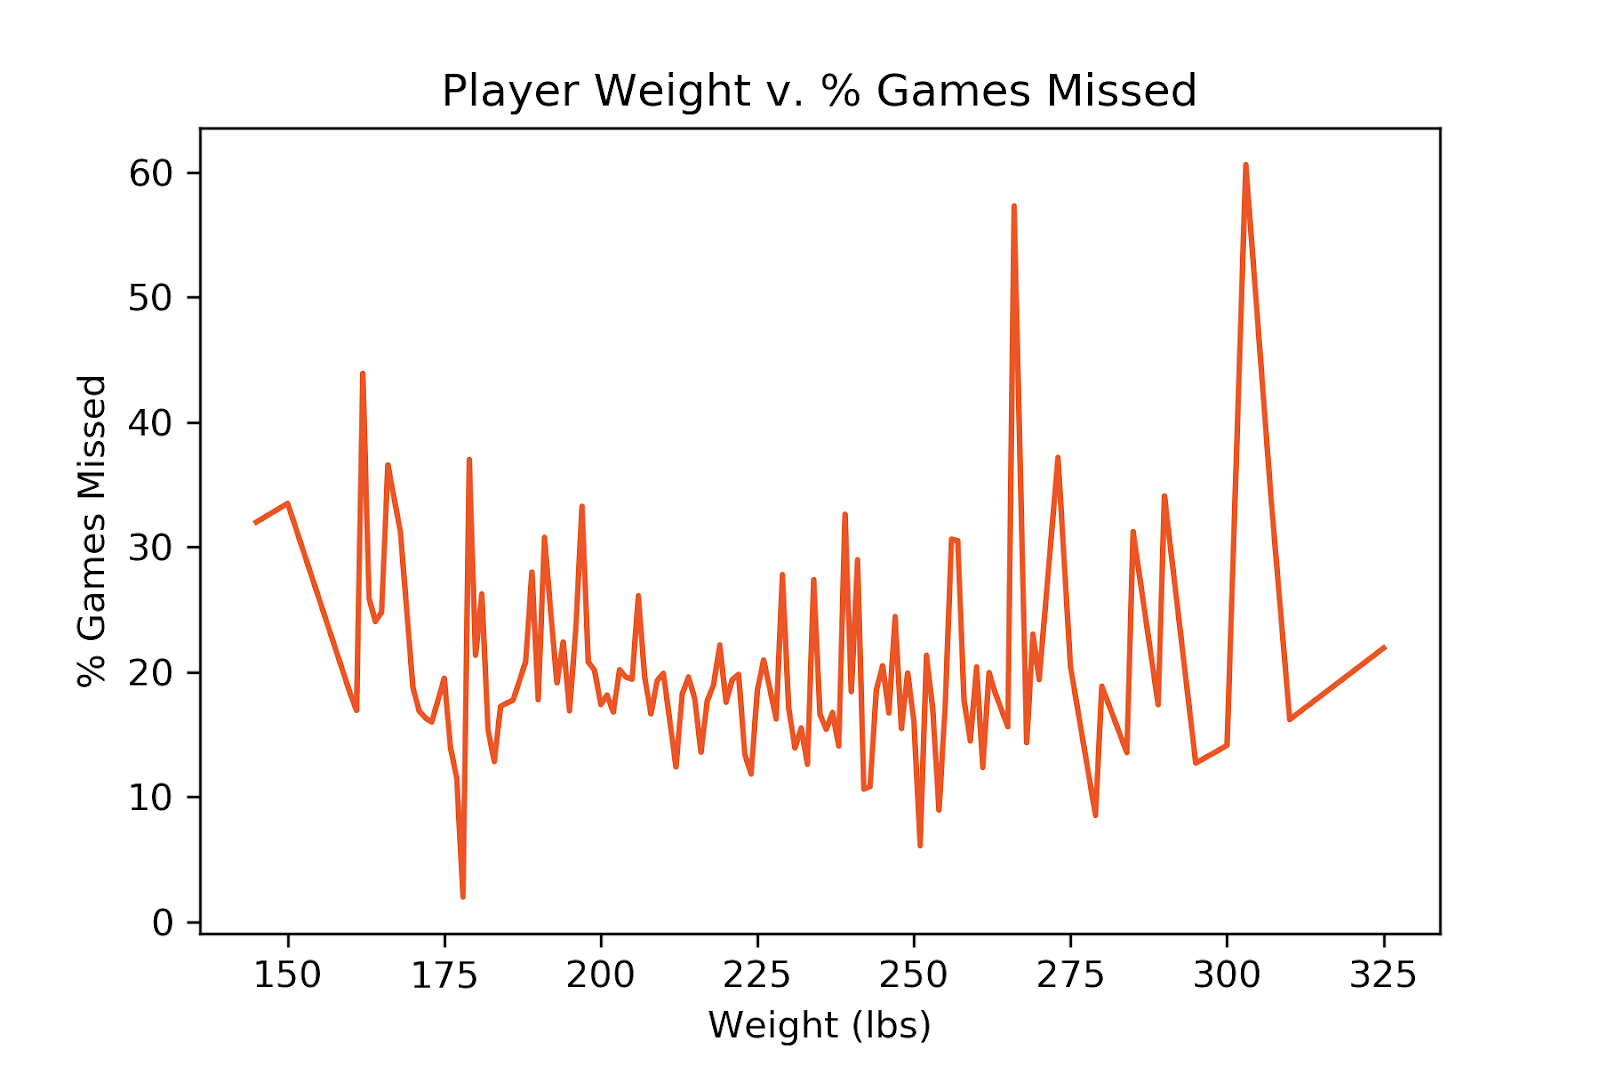 A Data Analysis of Missed NBA Games